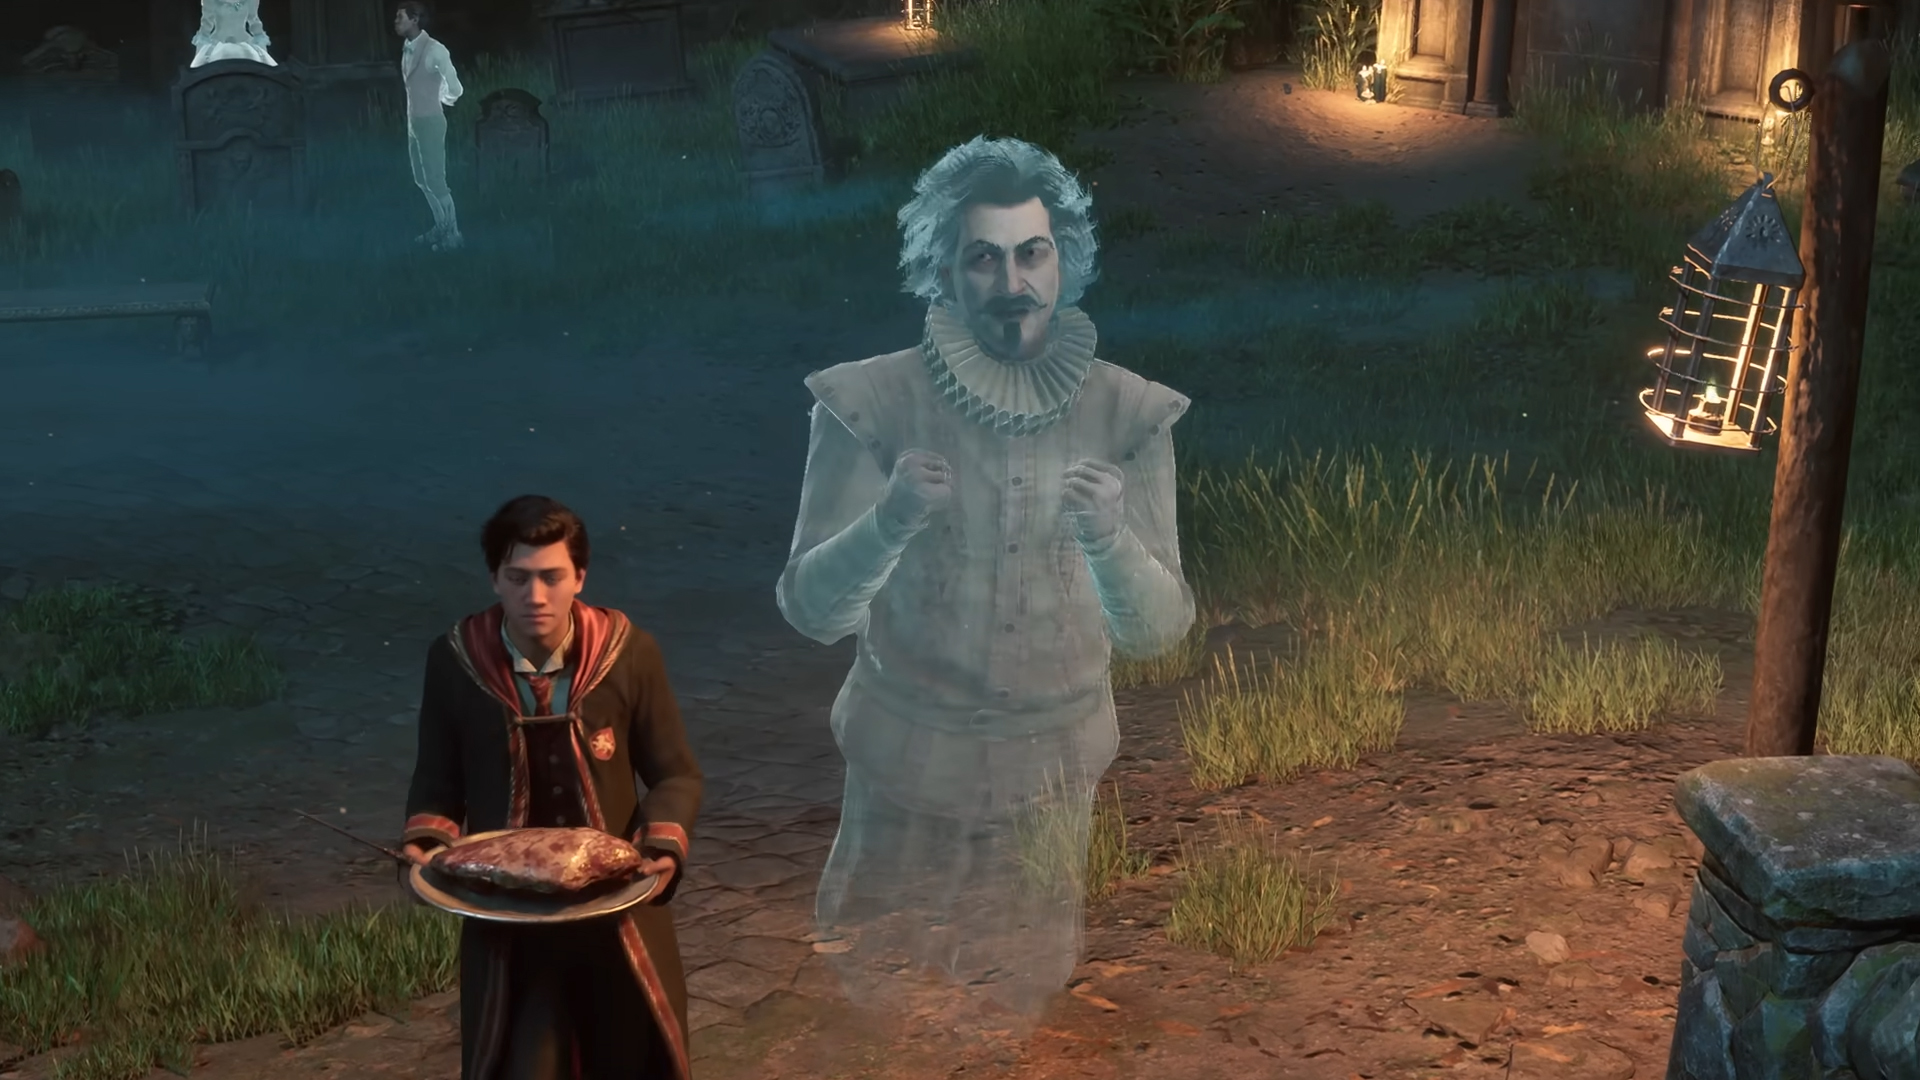 Everything you need to know before playing Hogwarts Legacy